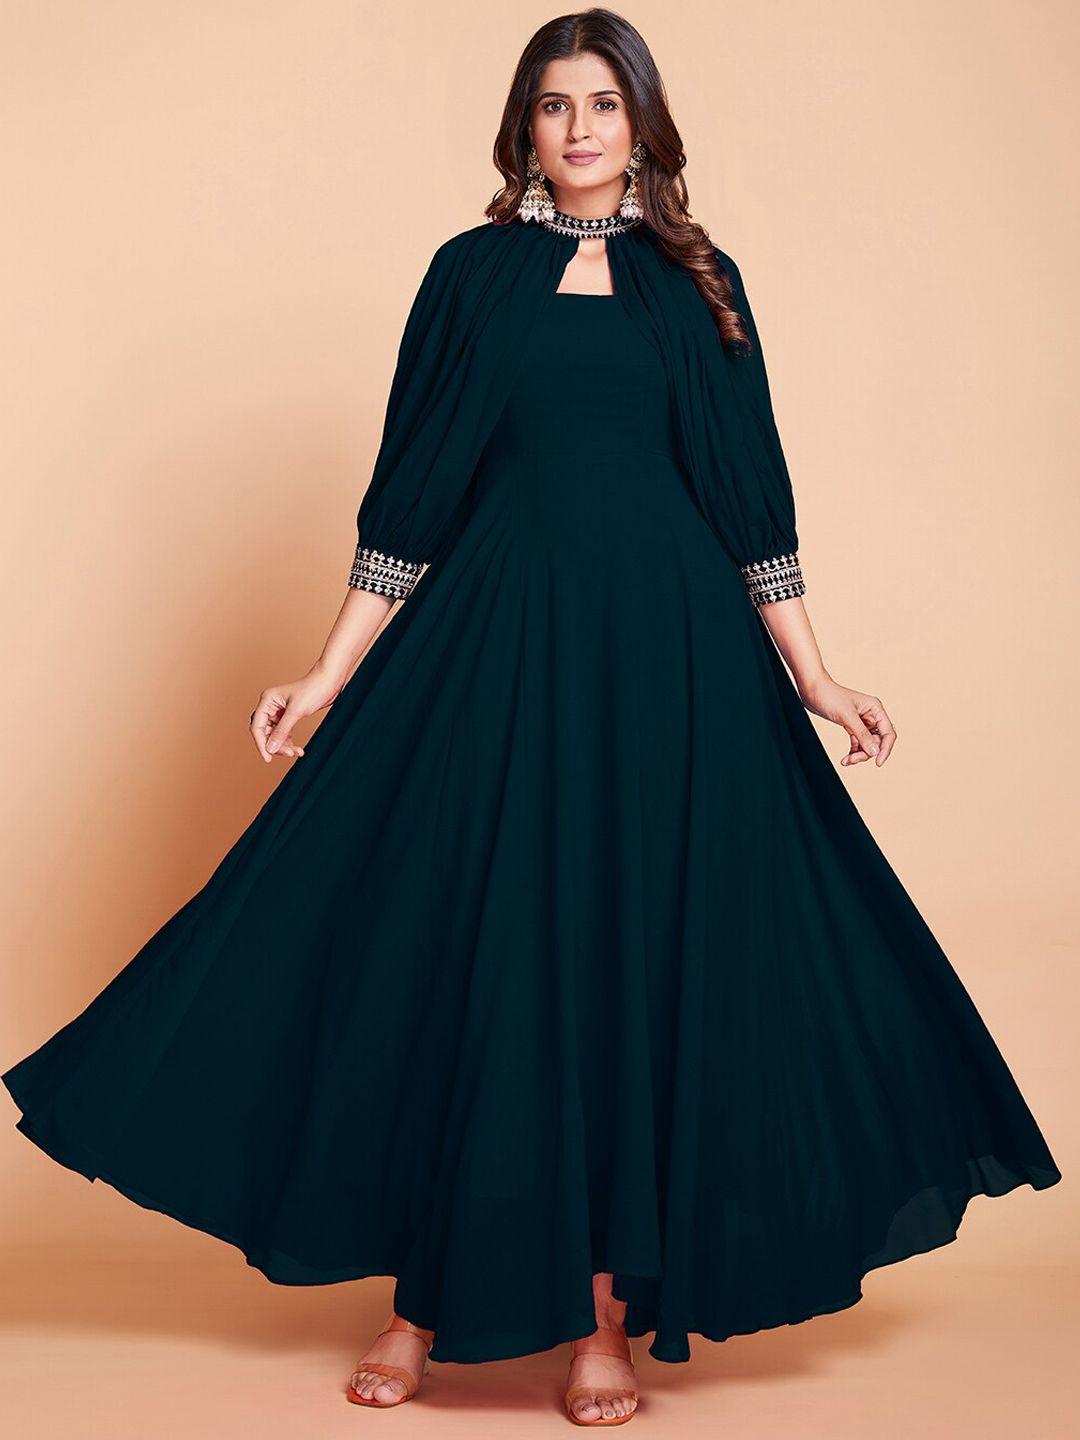 fusionic maxi length gown with add-on sleeves ethnic dresses